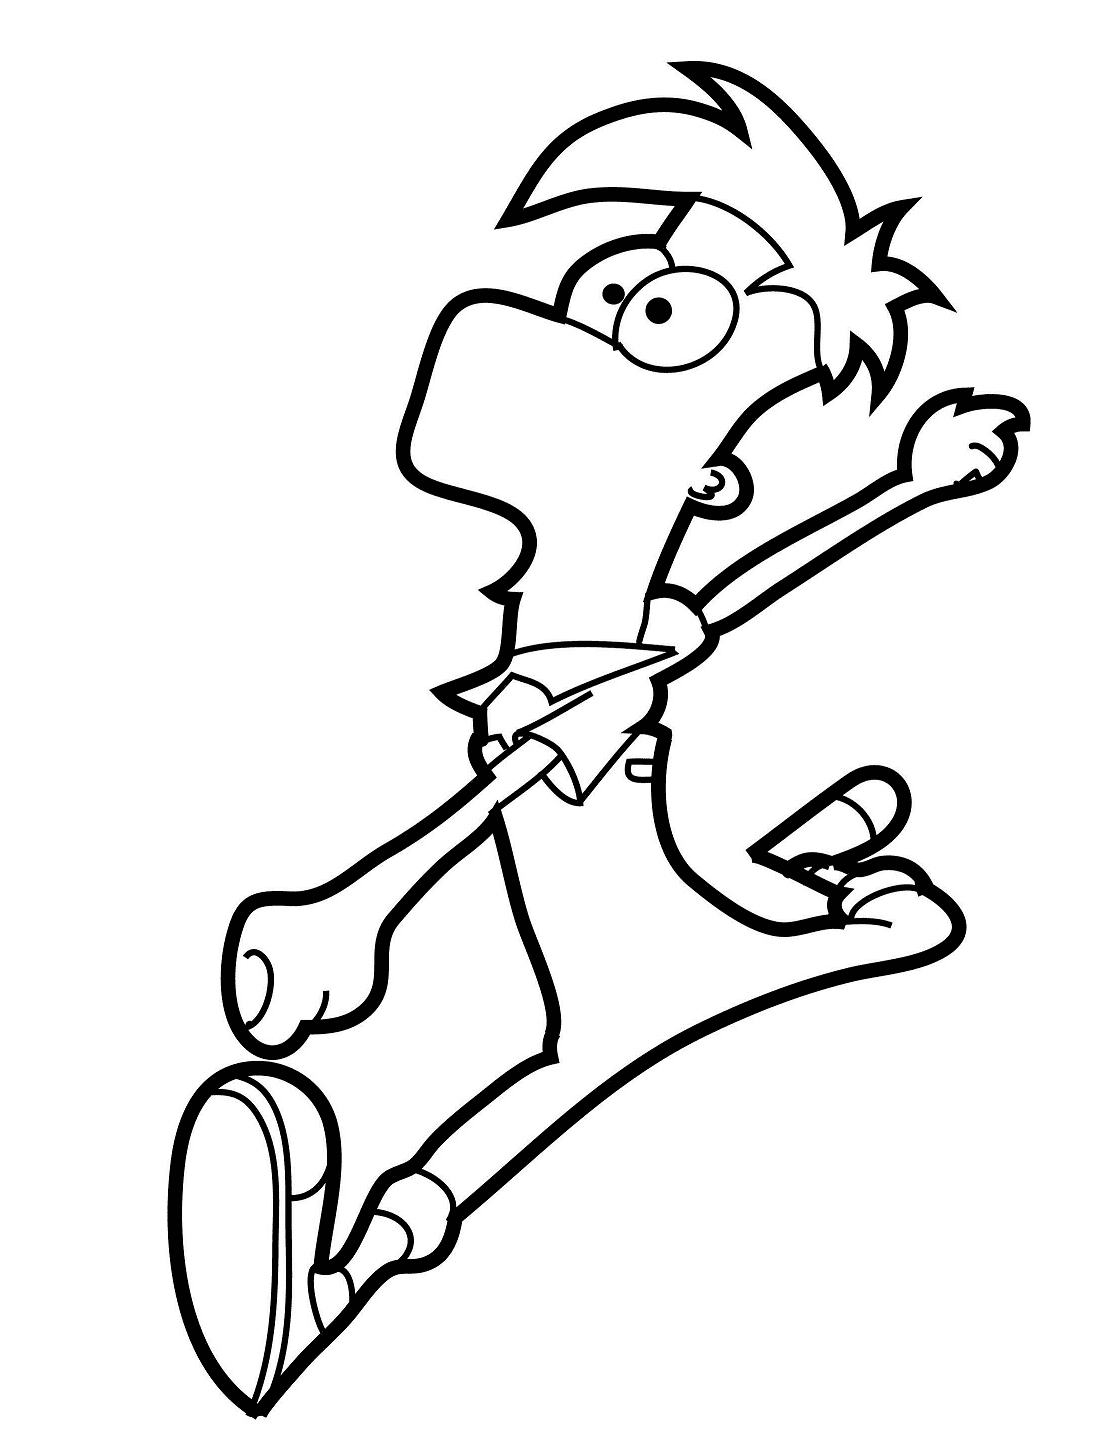 Ferb Running Coloring Page